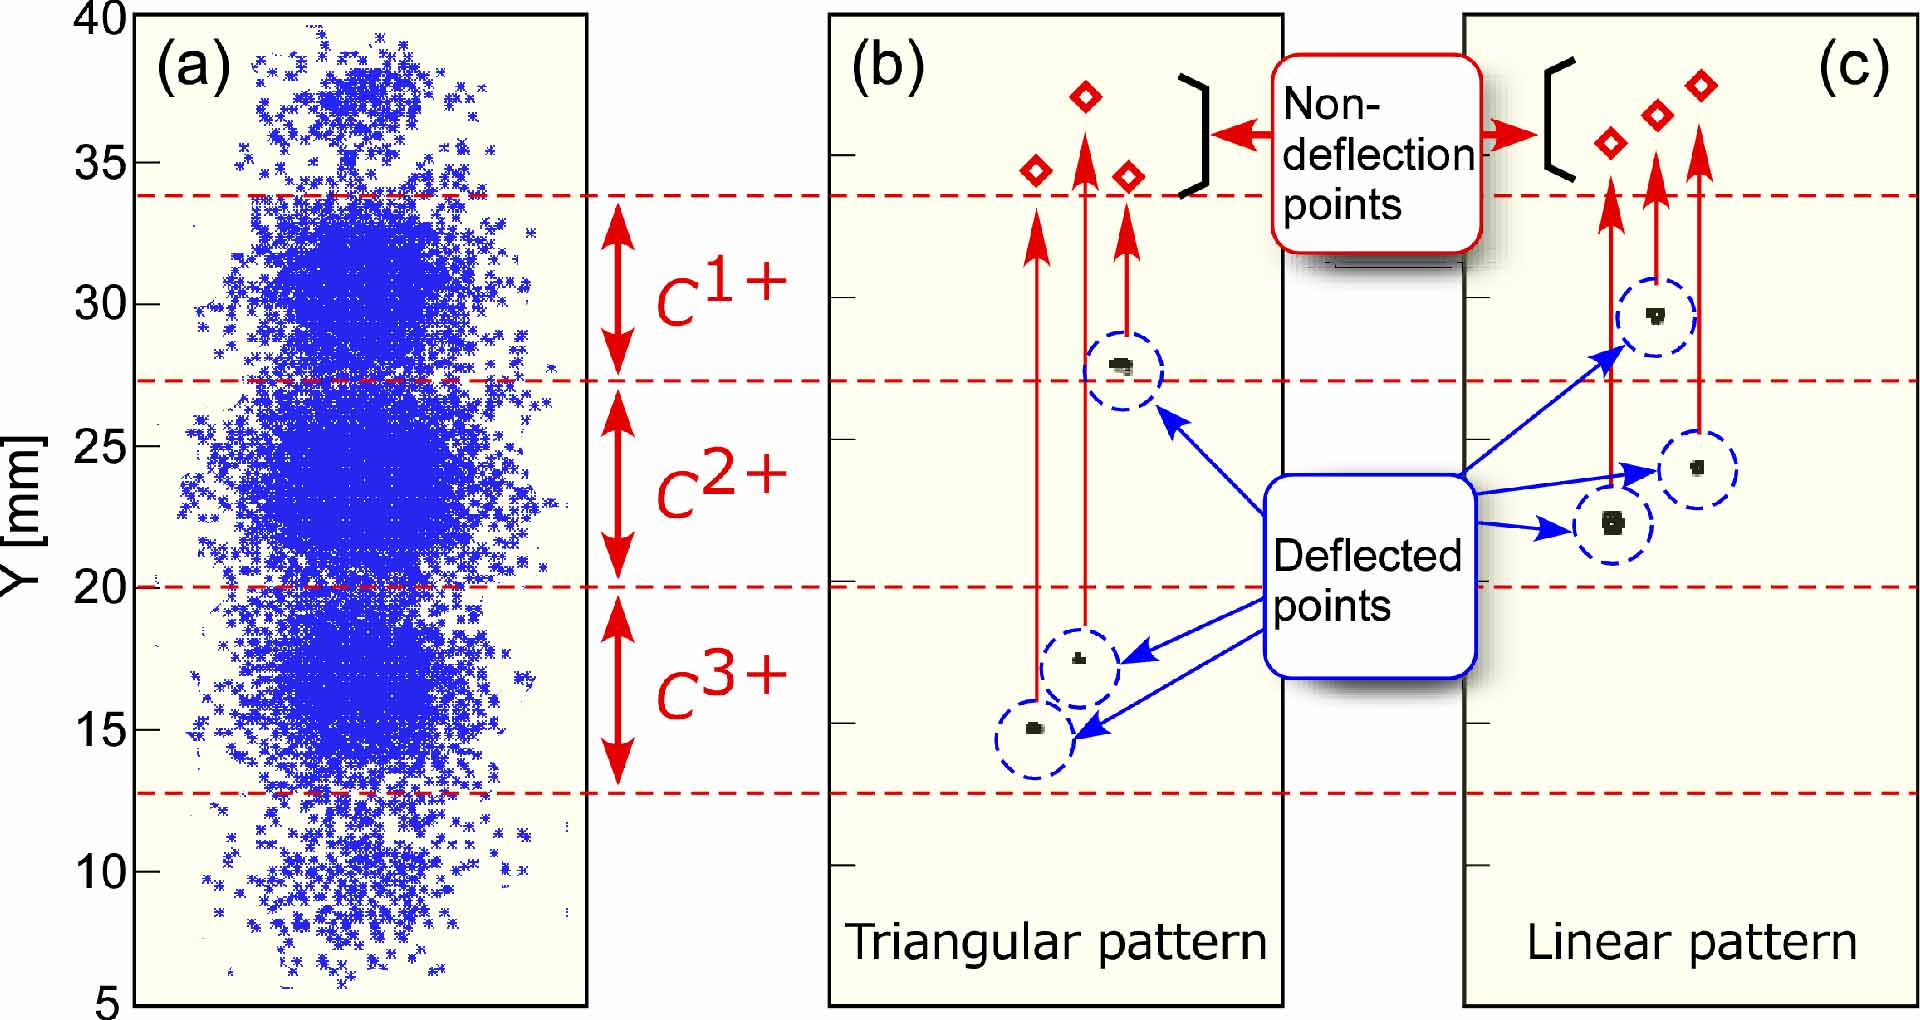 Two patterns of the correlation of the deflected points and the non-deflection points